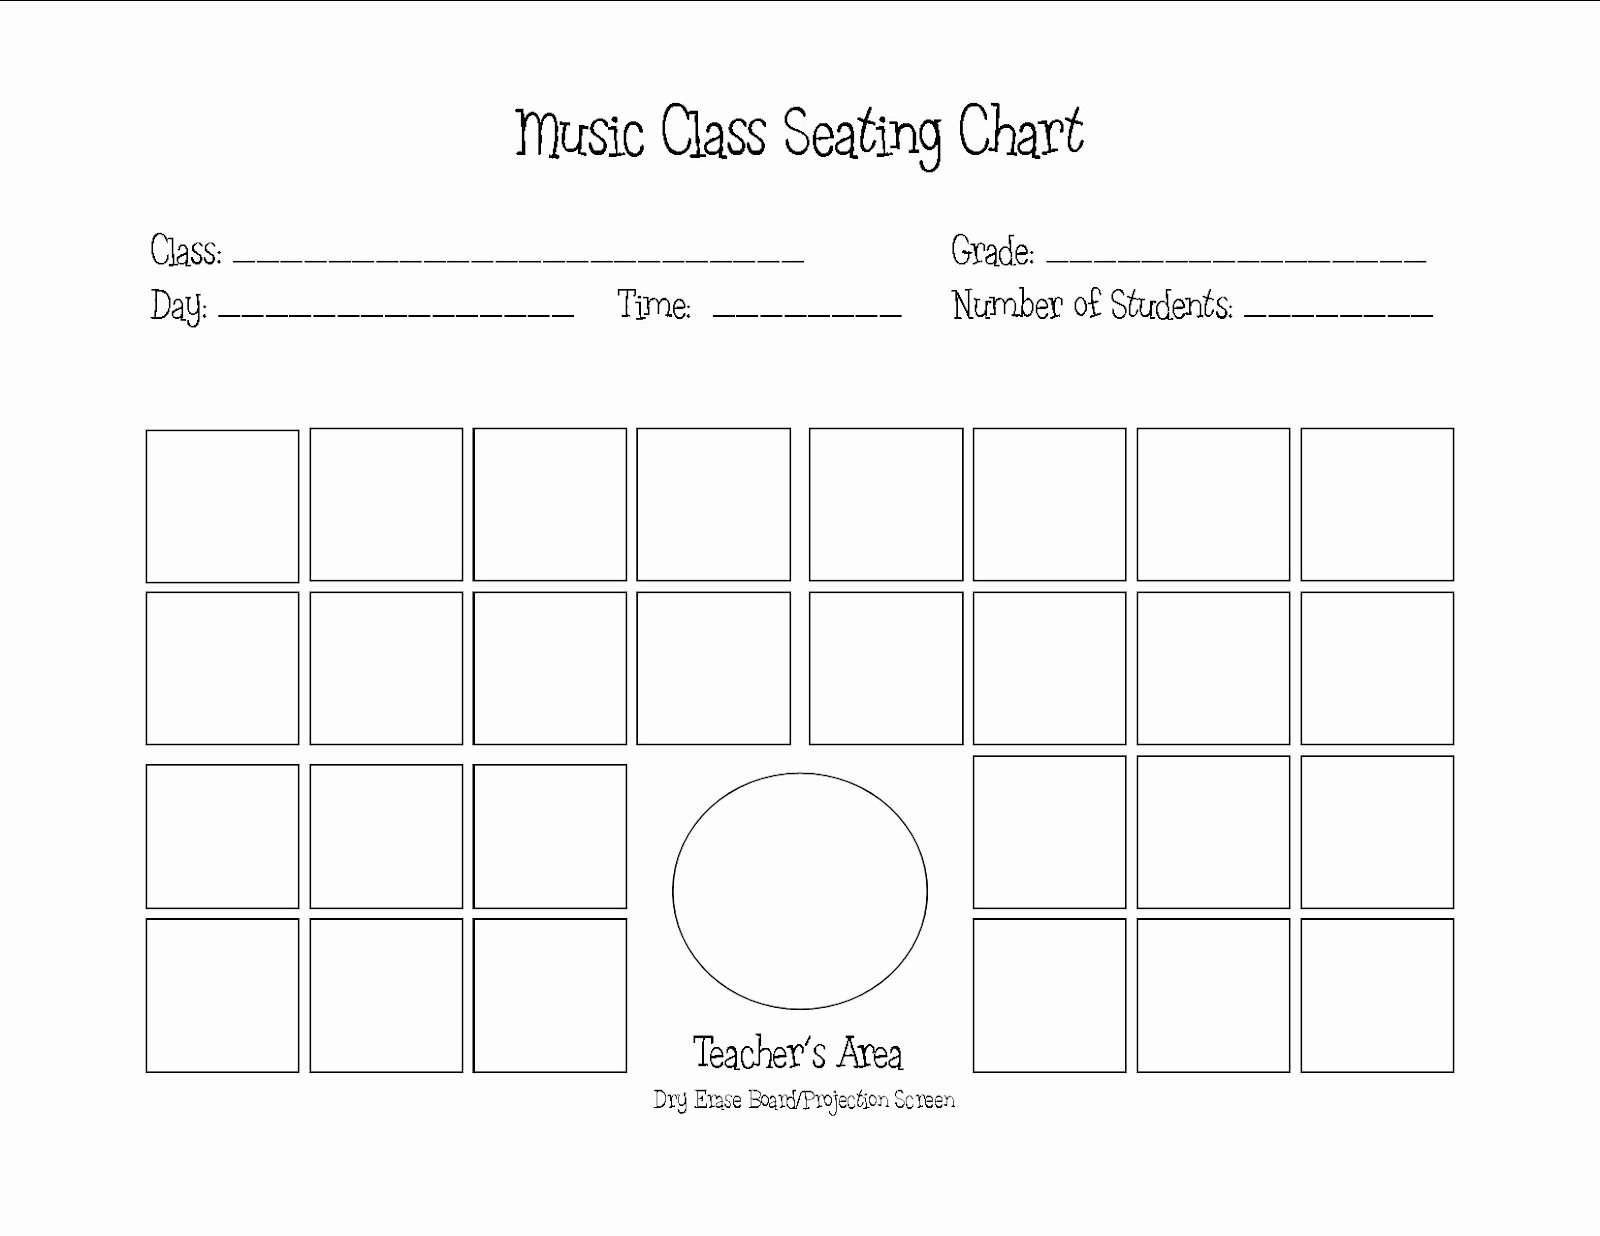 Choir Seating Chart Template Best Of so La Mi Music Keeping Busy